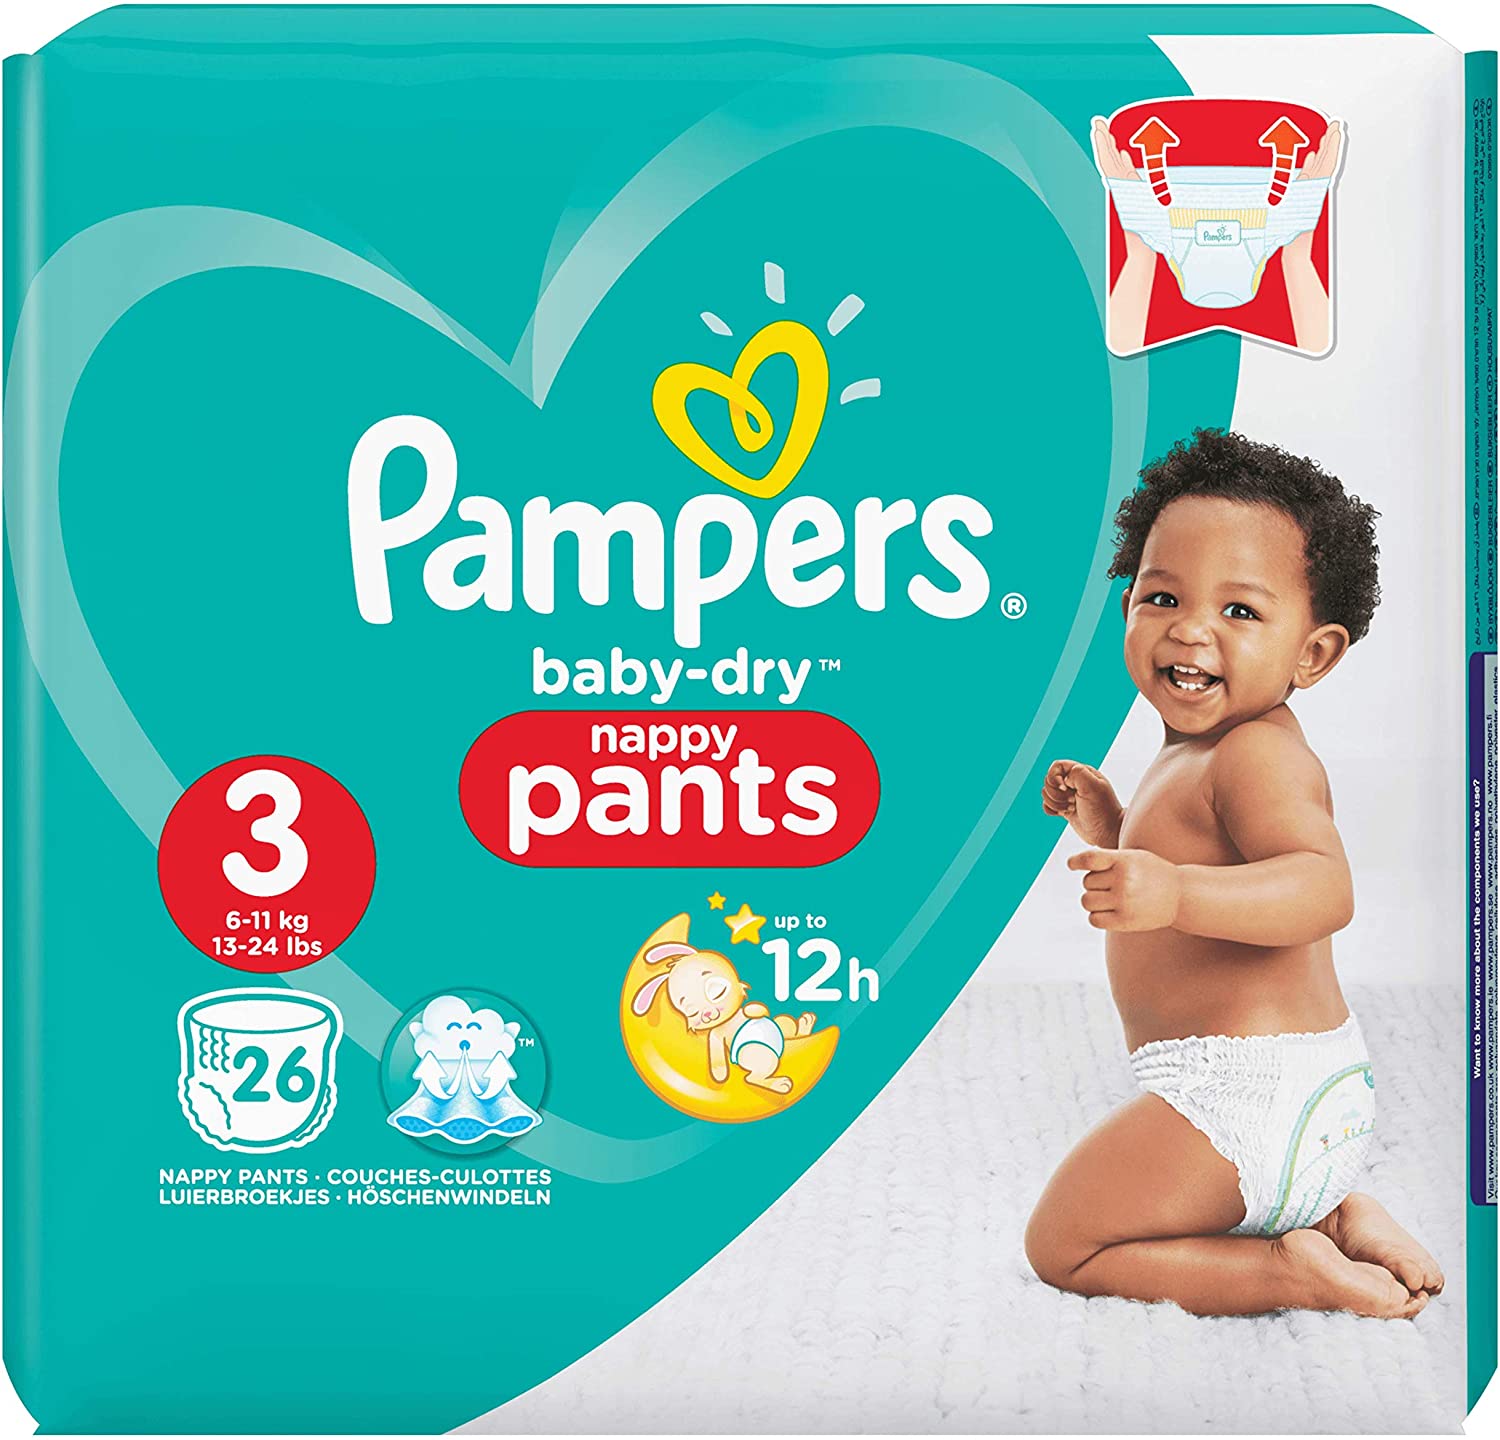 pampers pants 3 26